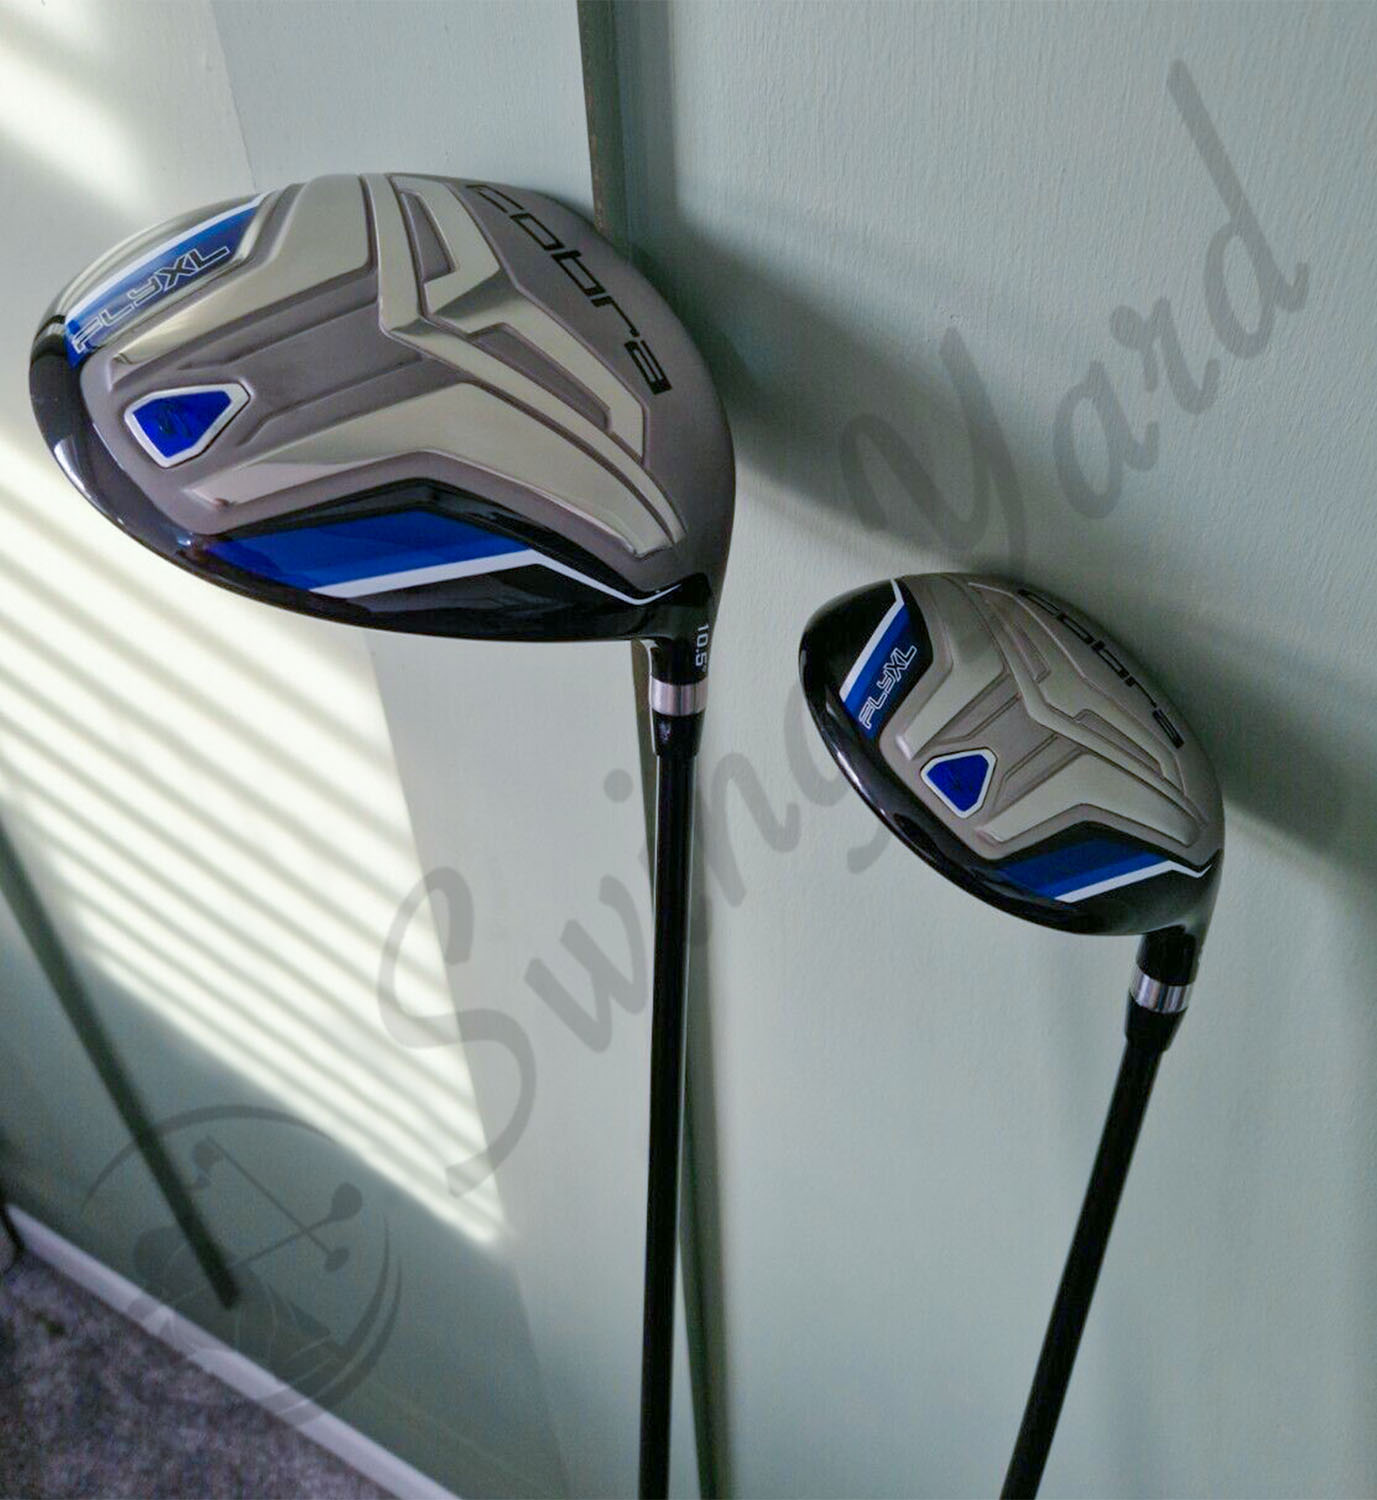 The driver and fairway wood from the Cobra Fly XL set